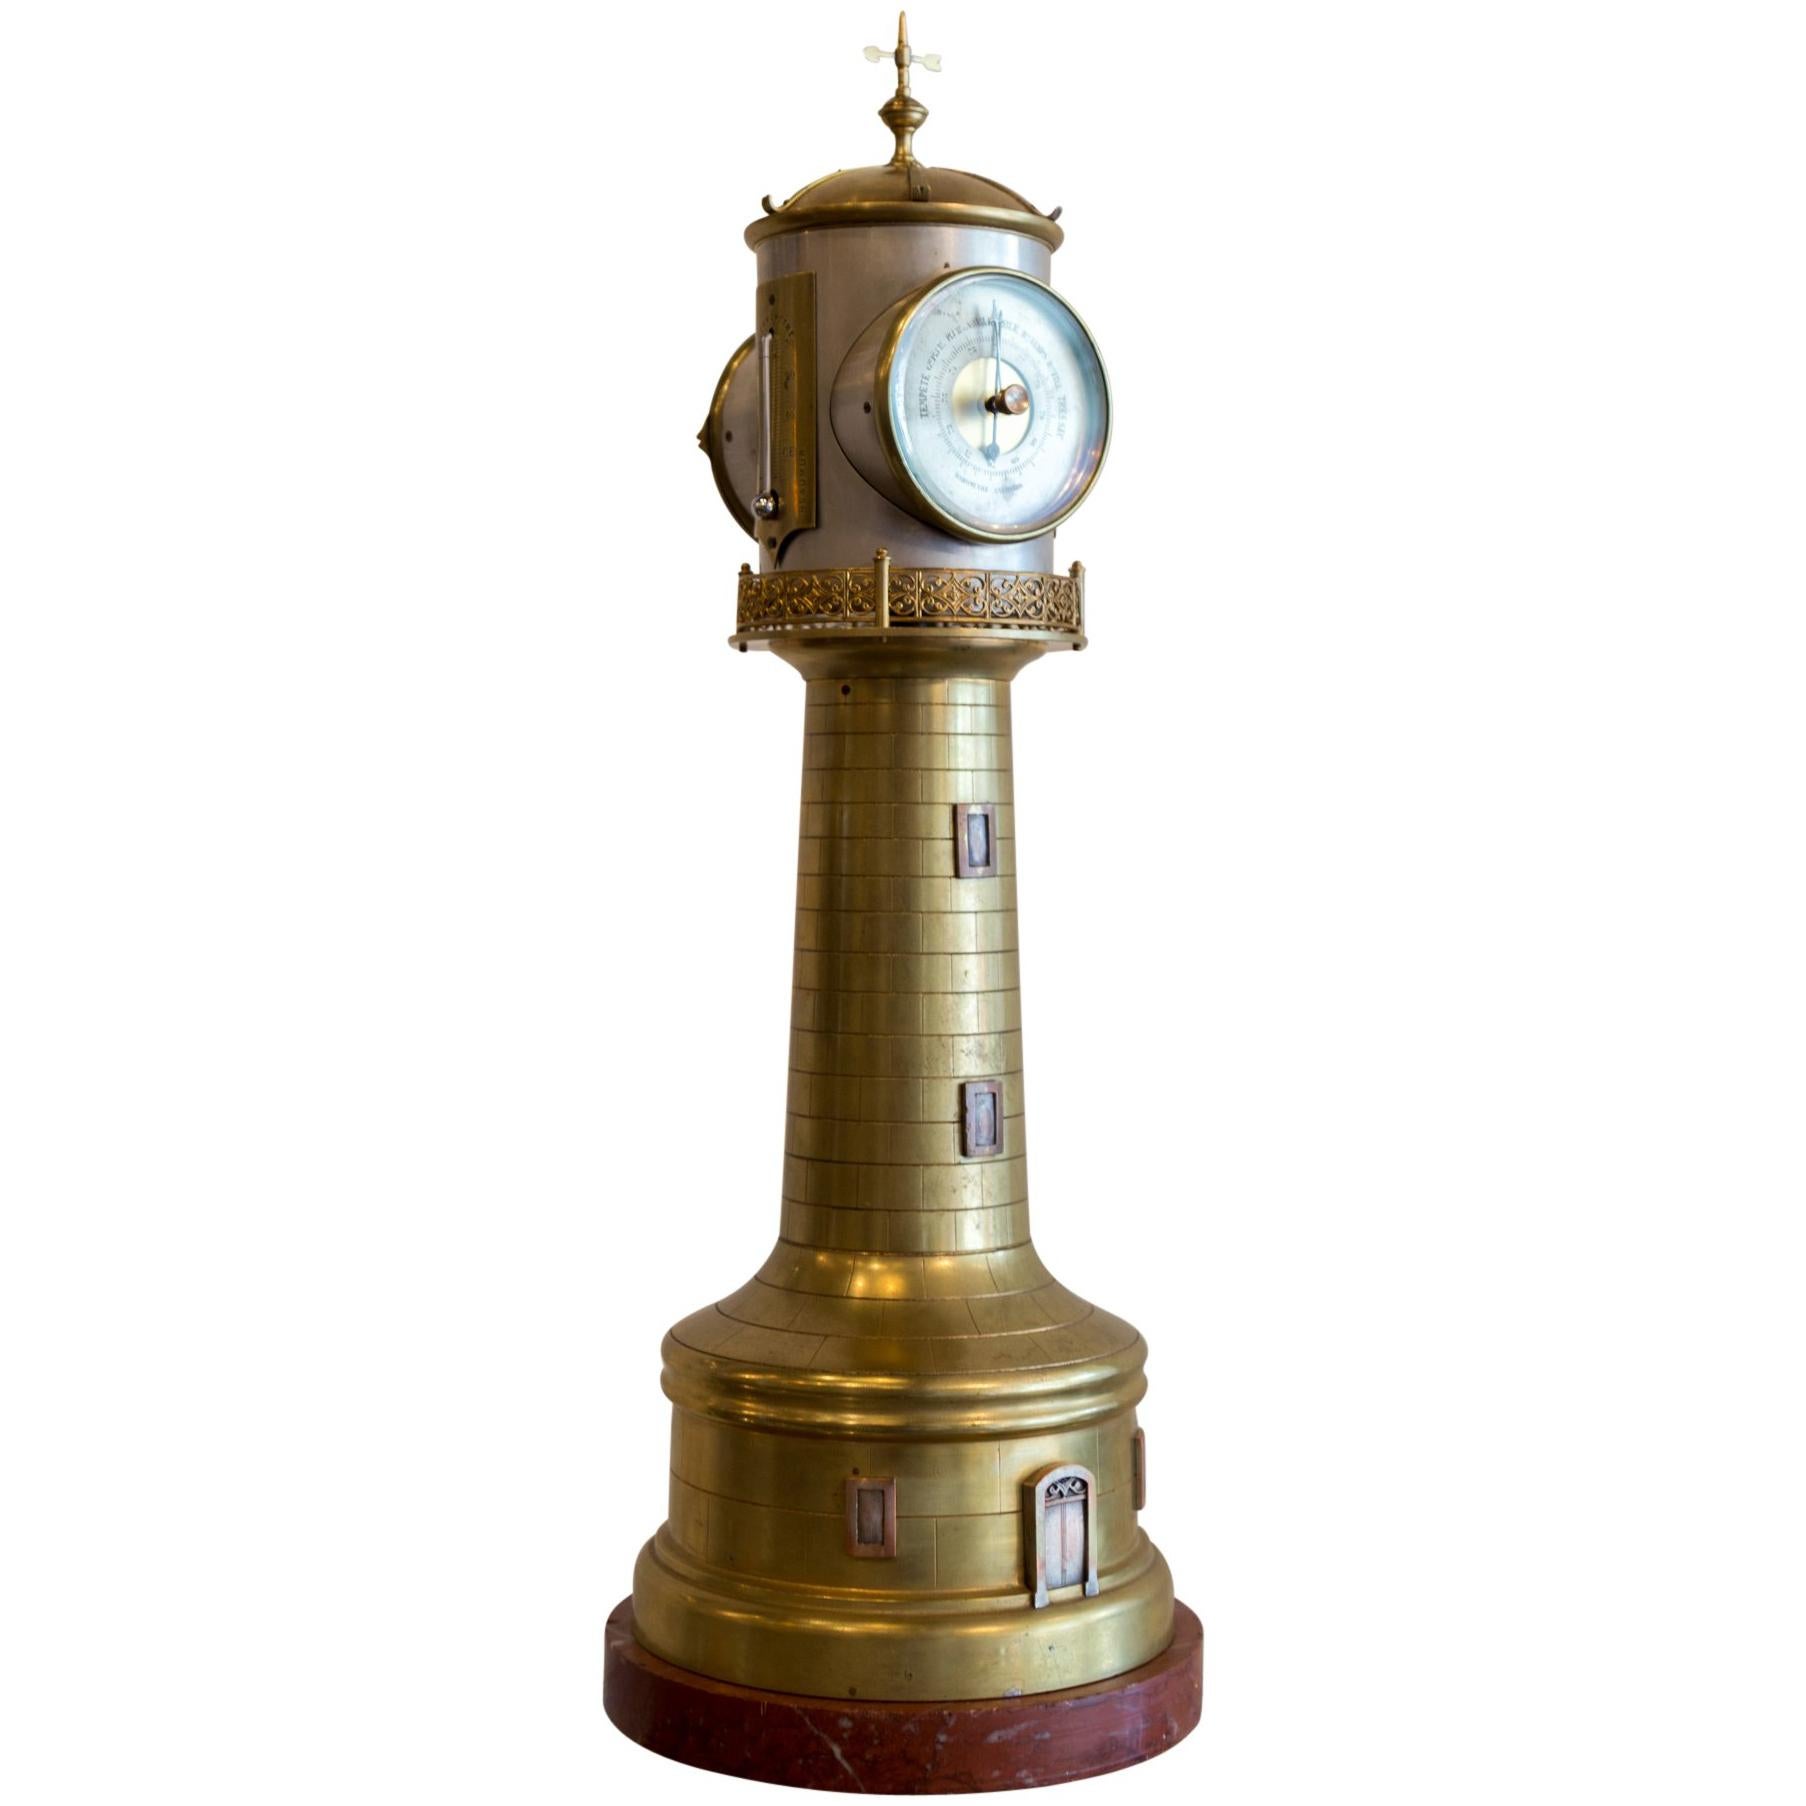 French Animated Industrial Lighthouse Clock by Guilmet, circa 1880